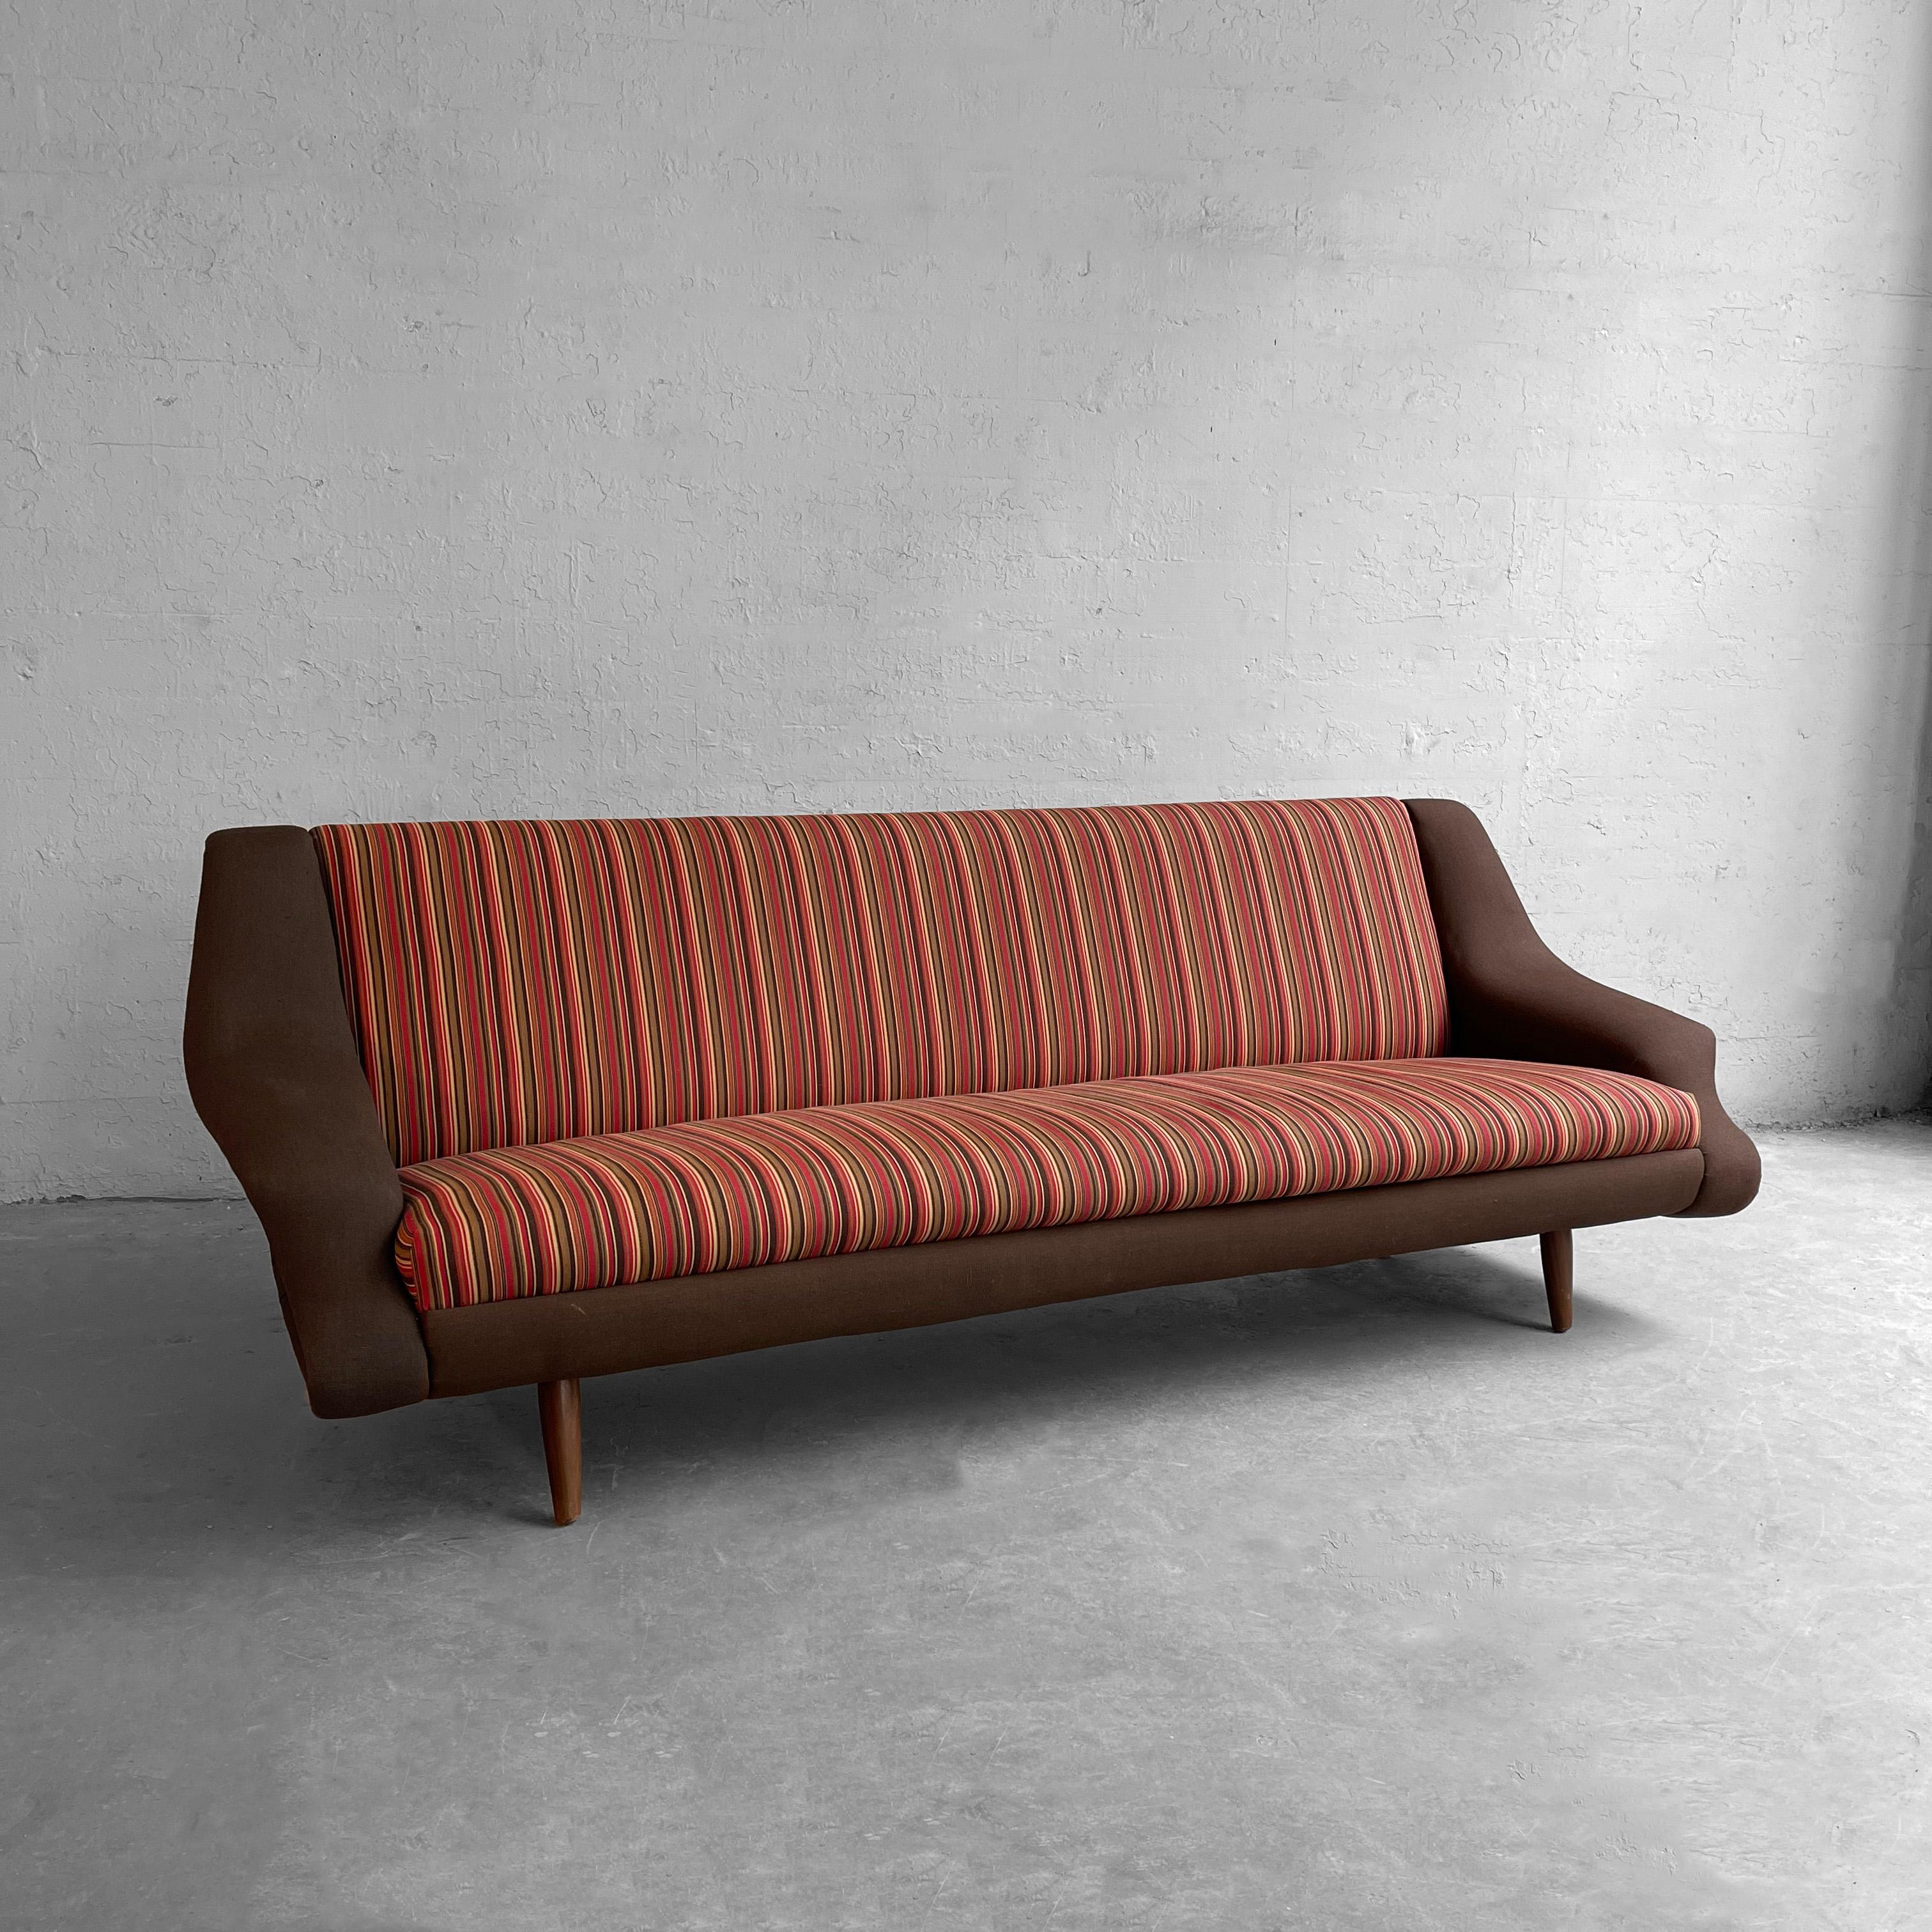 20th Century Italian Mid-Century Modern Sofa In The Style Of Marco Zanuso For Sale